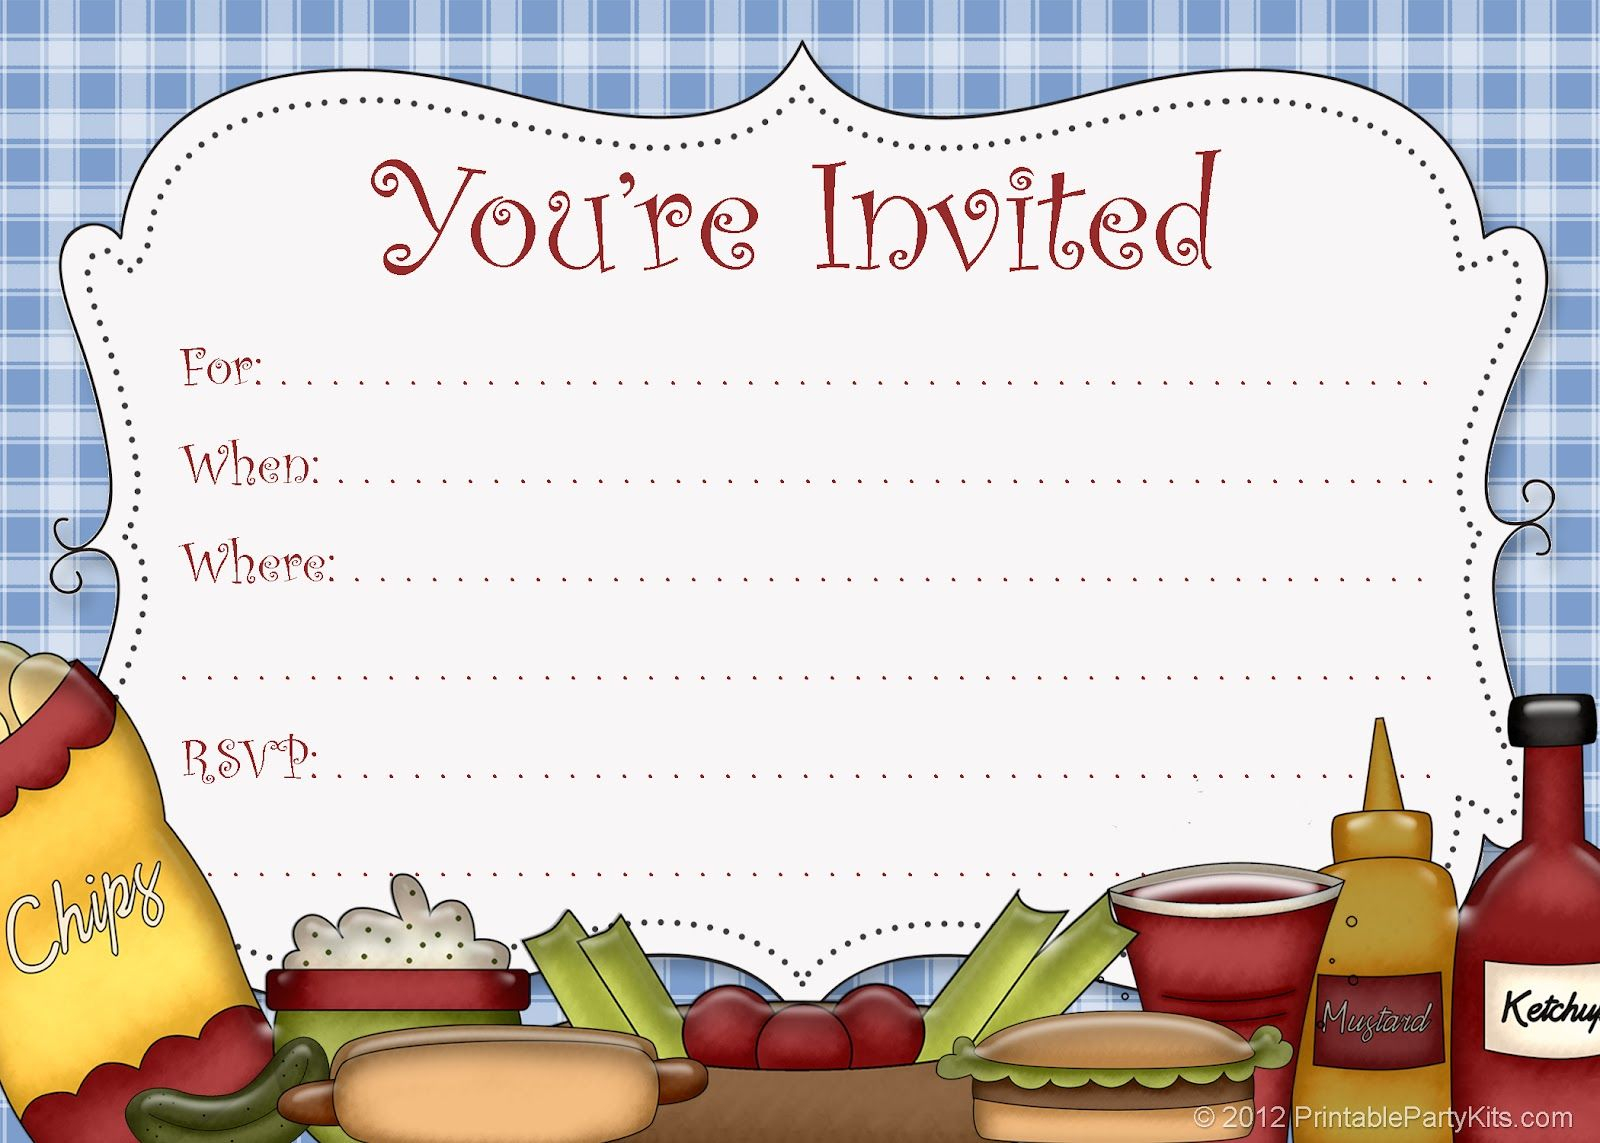 5 Best Images Of Free Printable Cookout Invitations Party Things intended for measurements 1600 X 1143